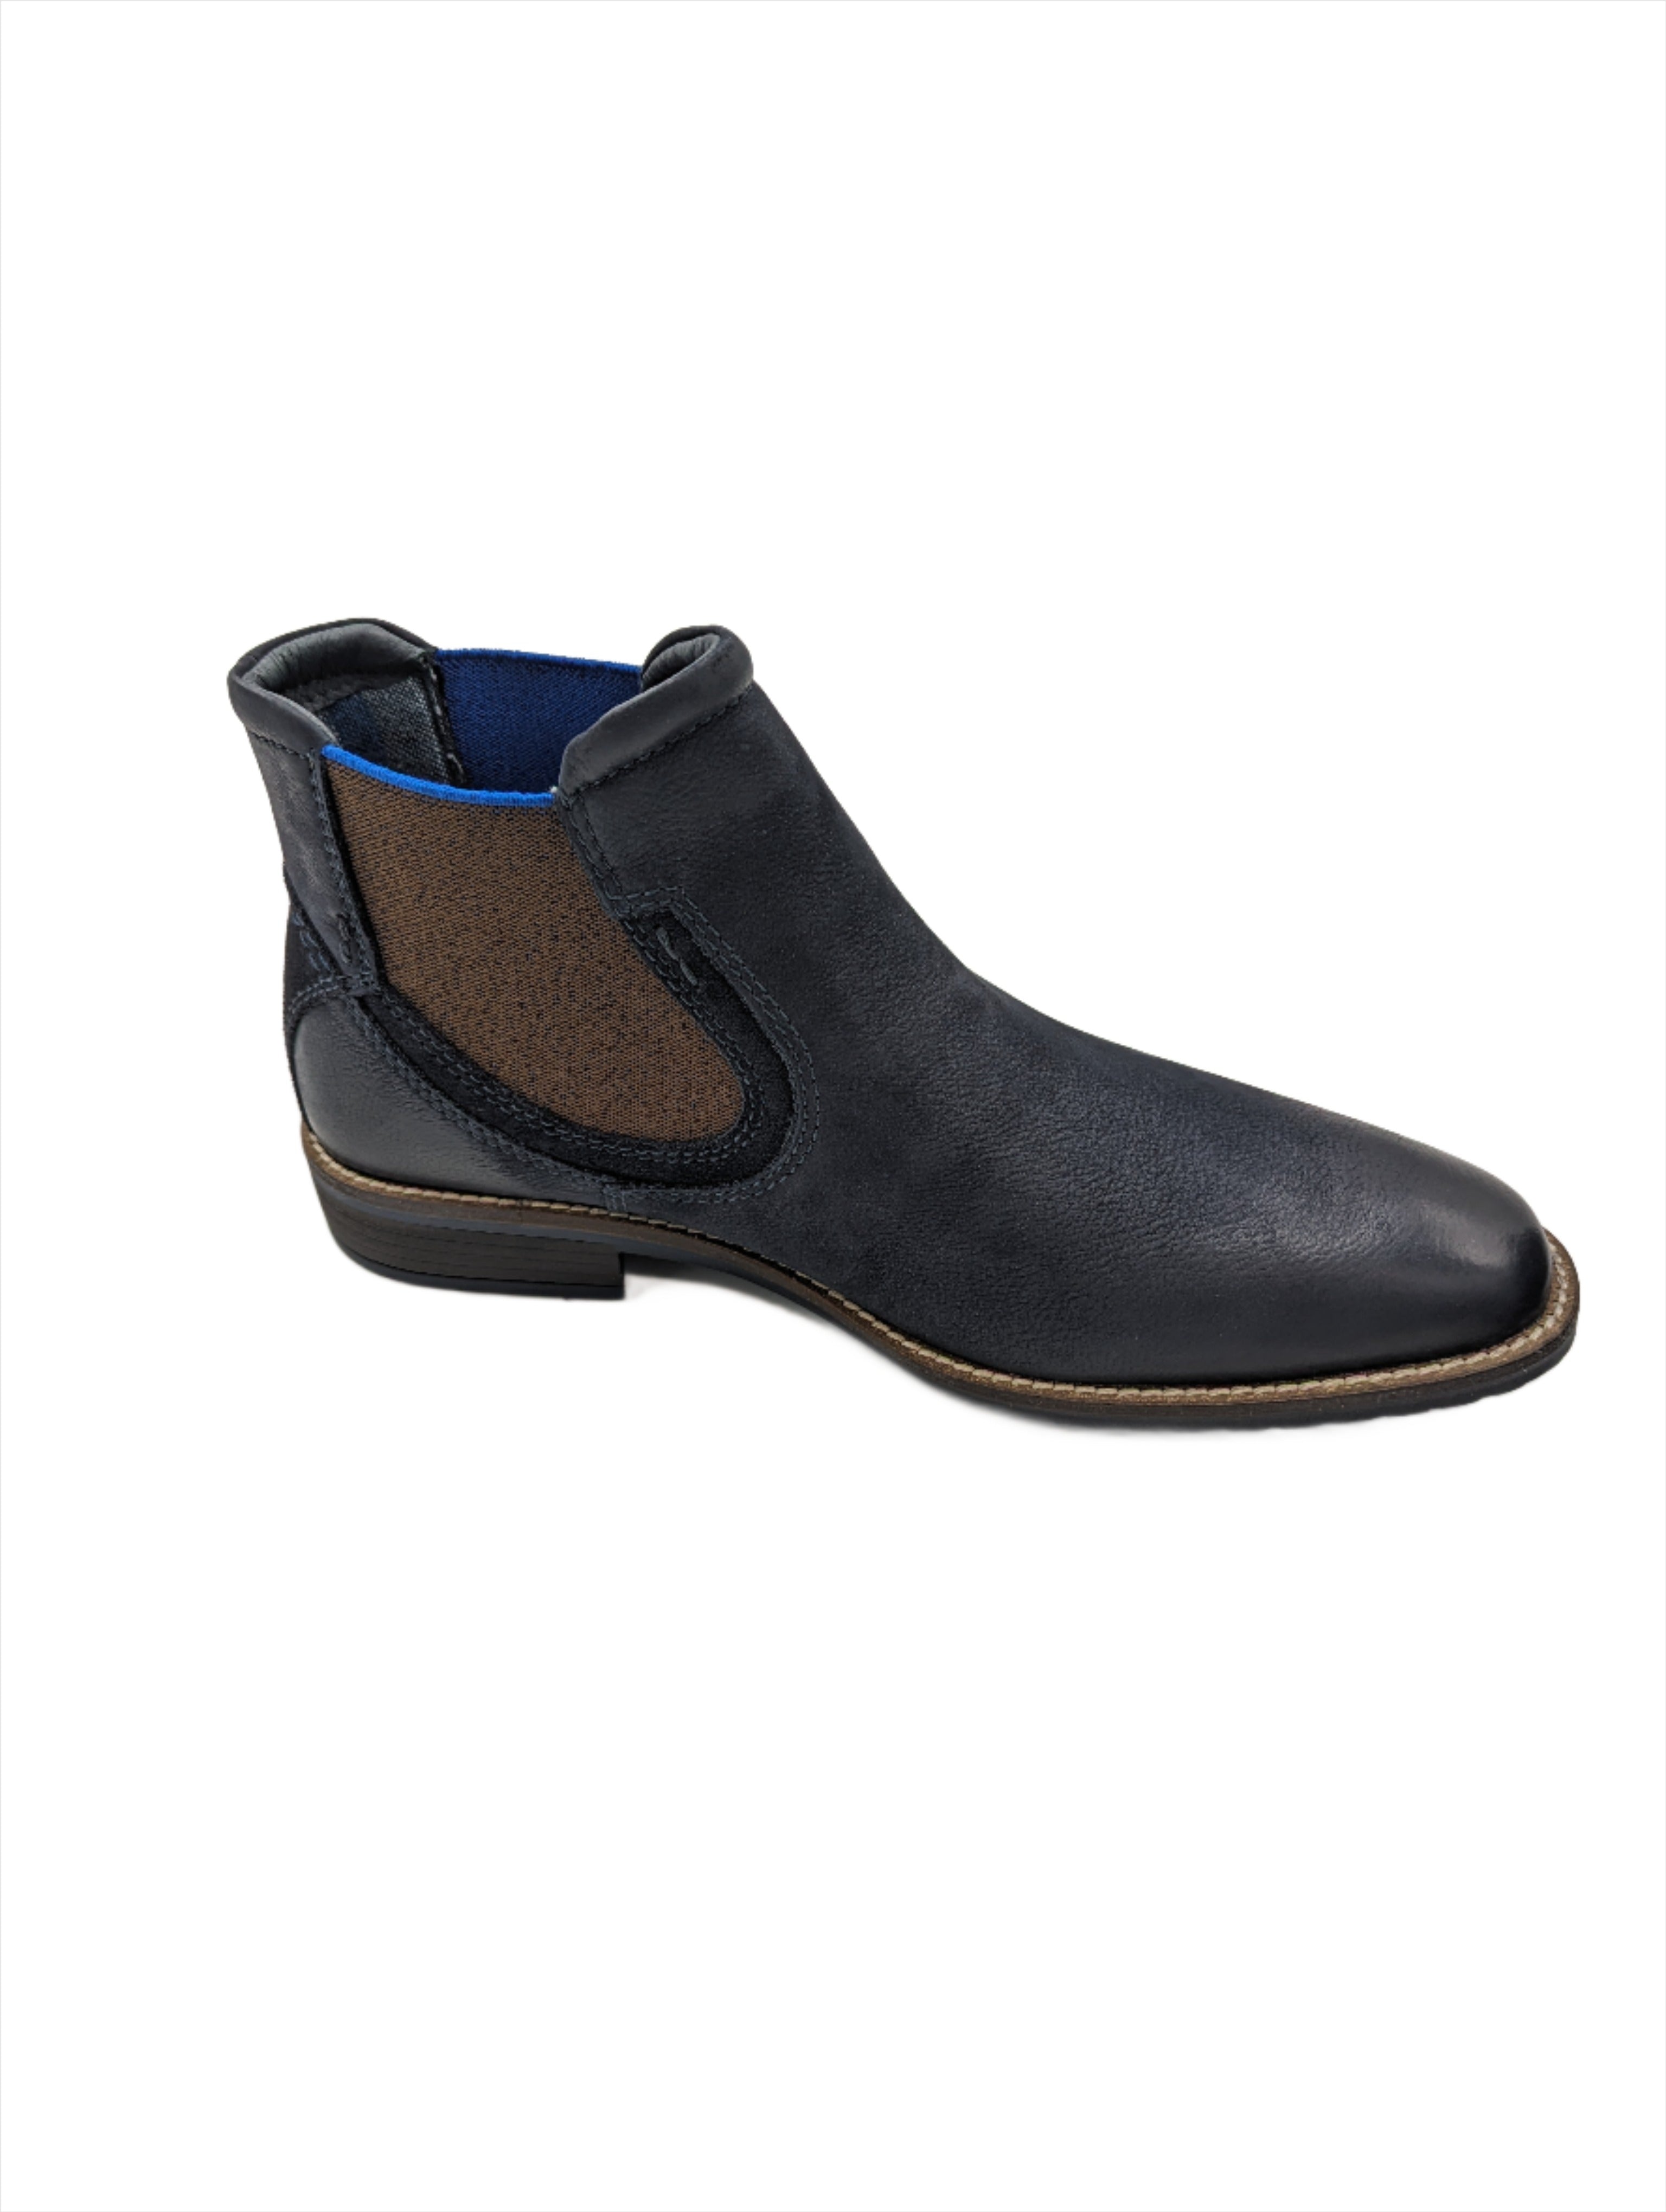 Santos Navy Chelsea Boot-Inside side view